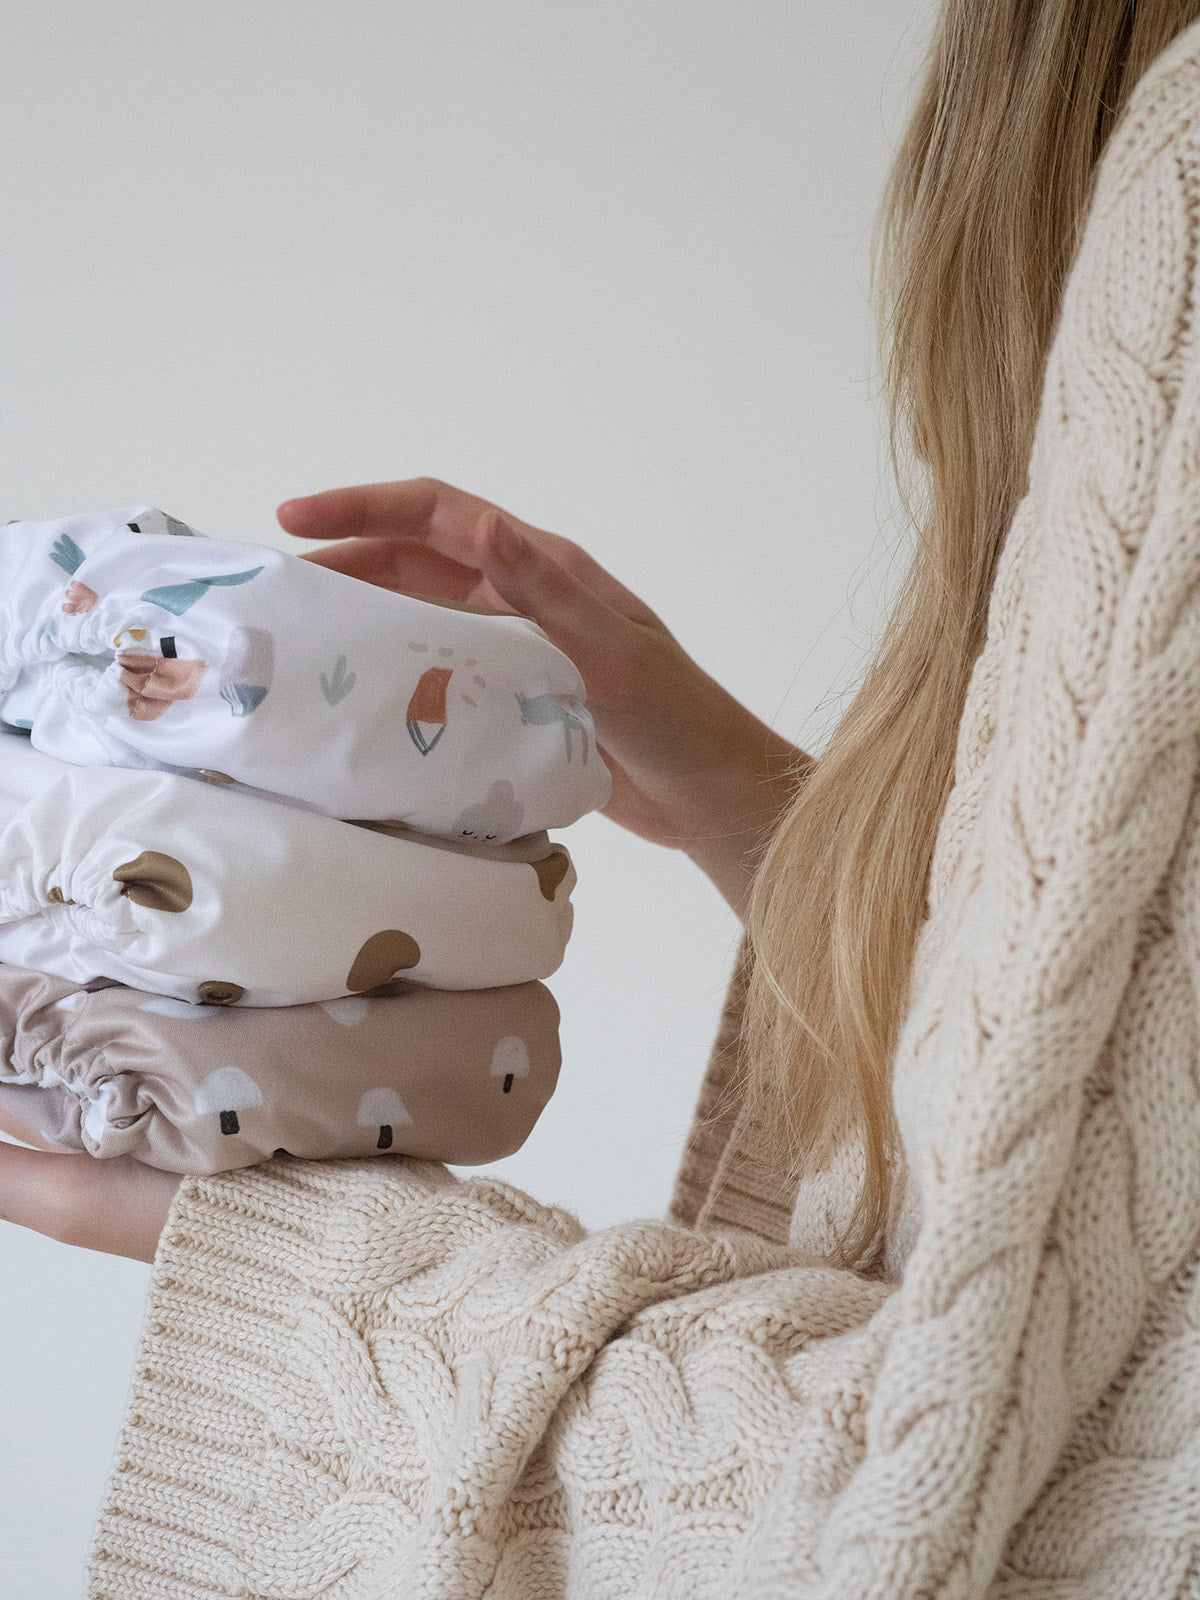 7 Easy Steps to Get Started with Cloth Nappies